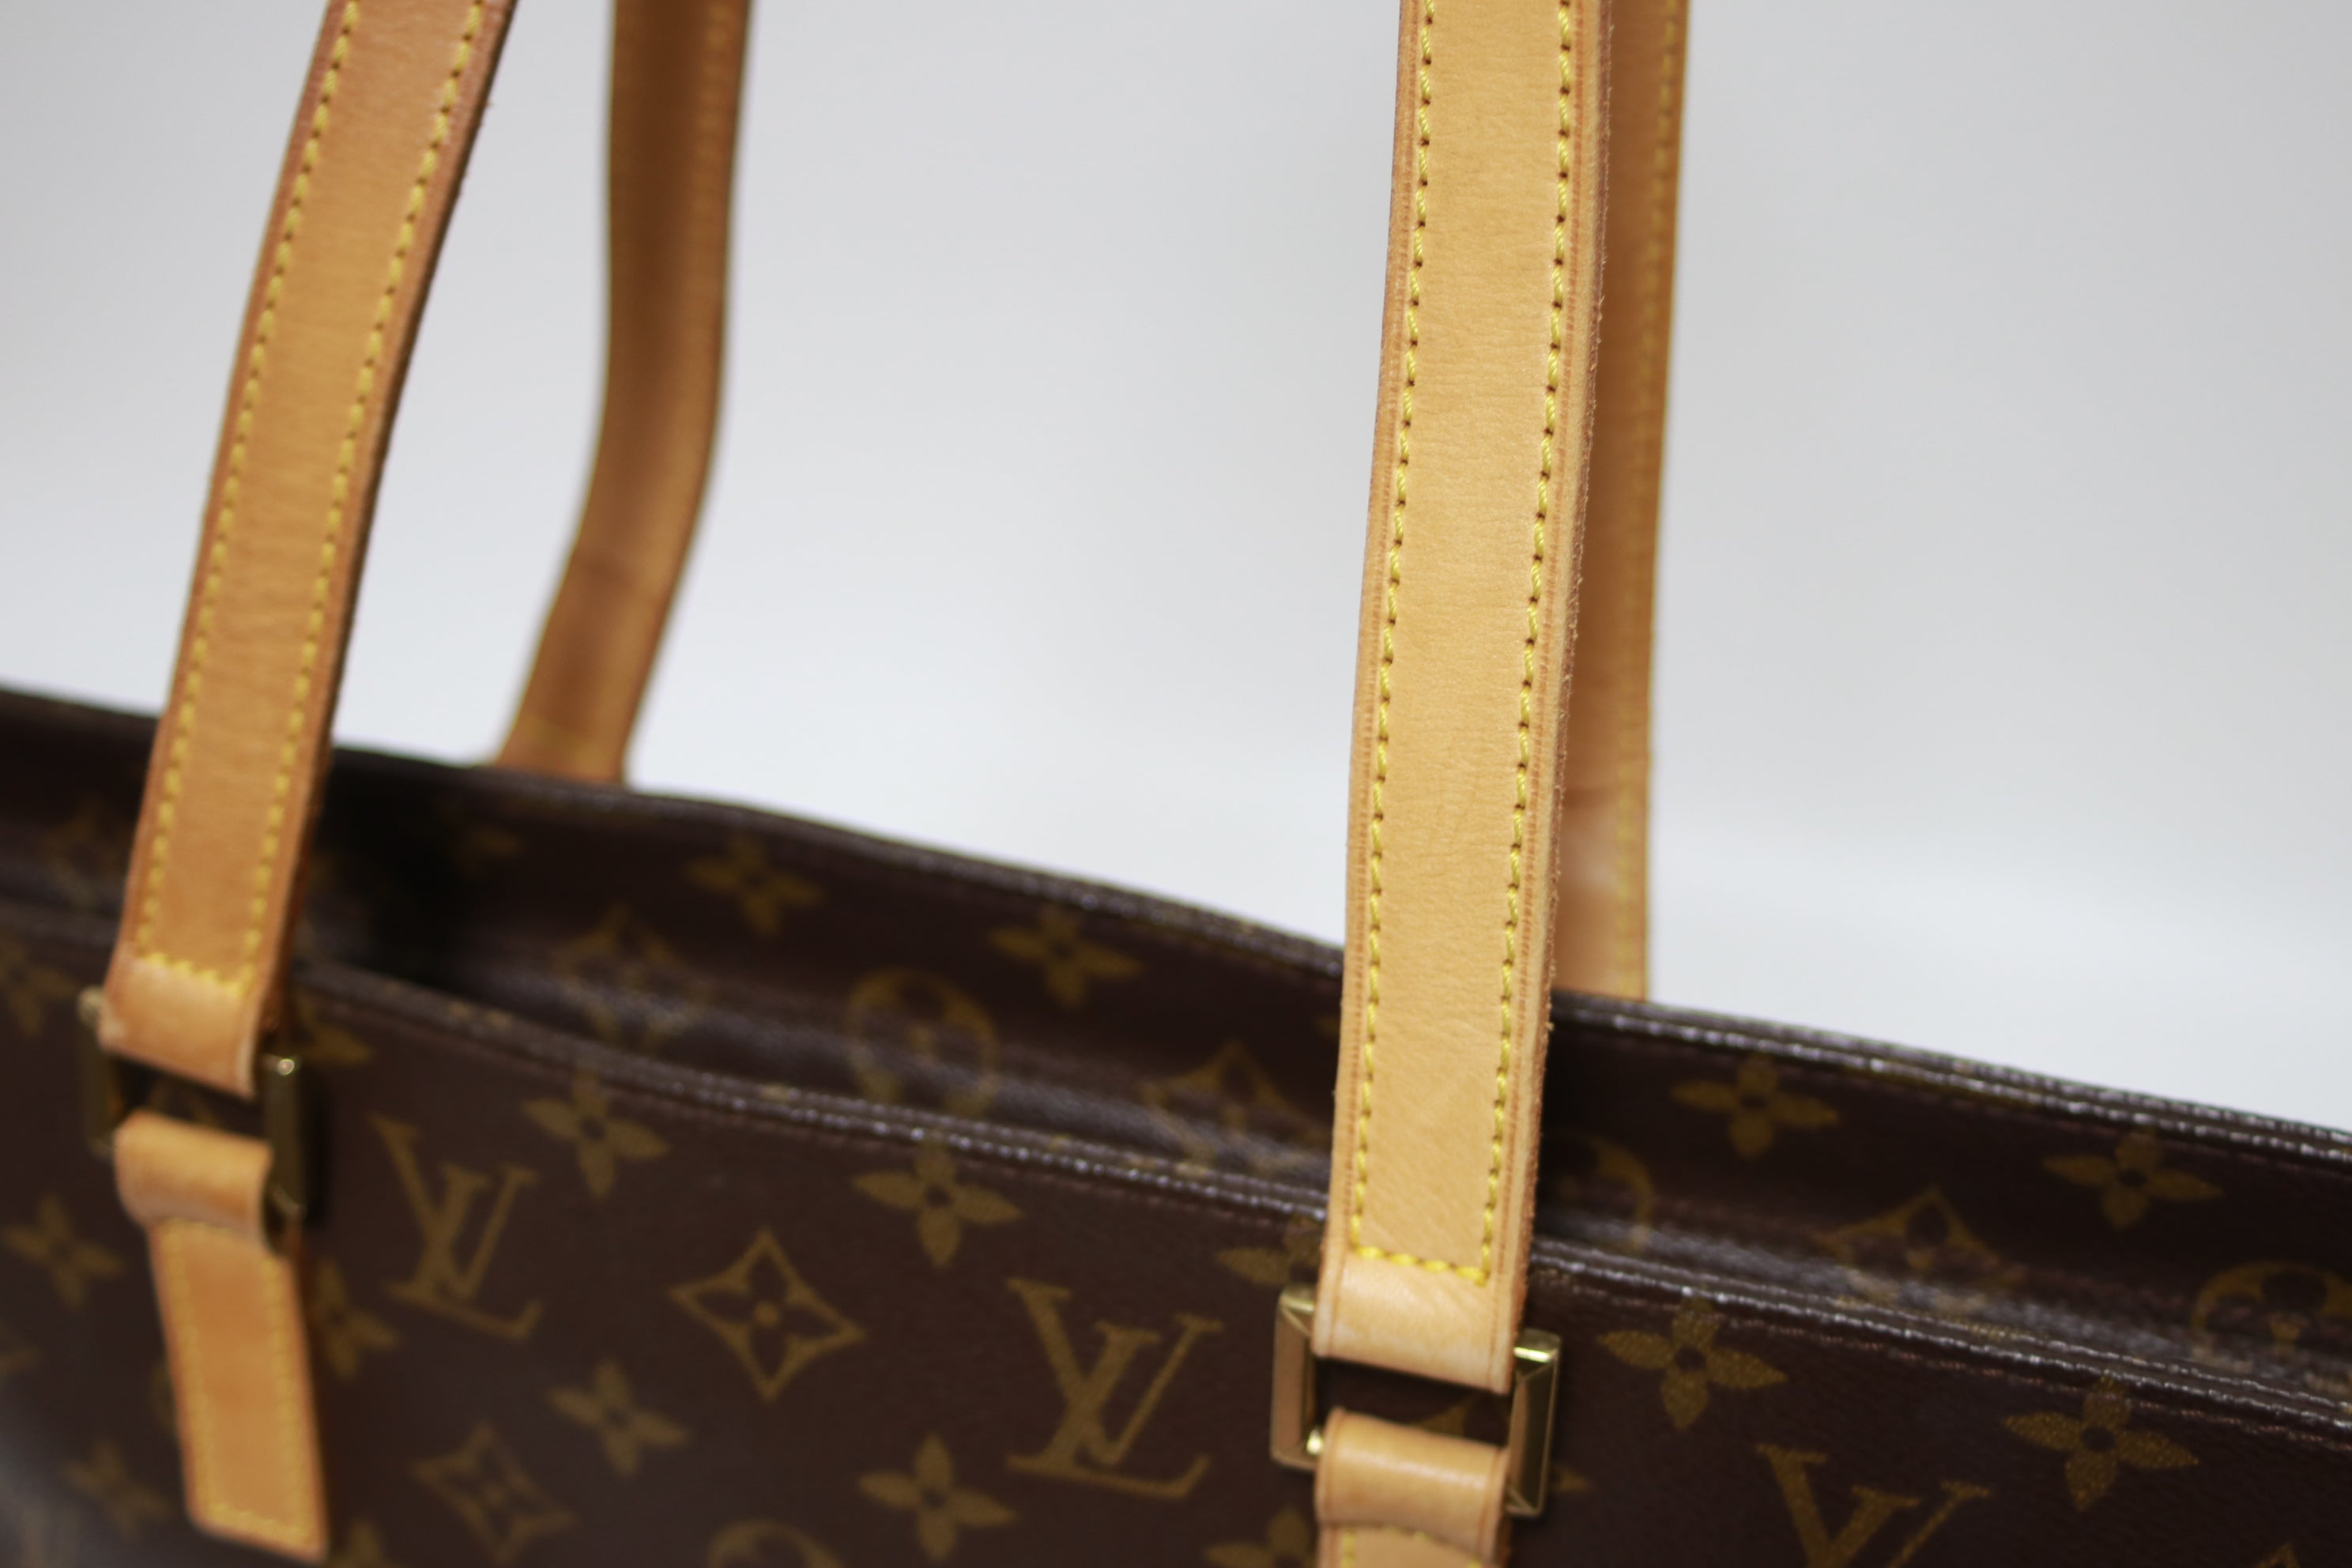 Louis Vuitton Luco Shoulder Tote Bag Used (8010)